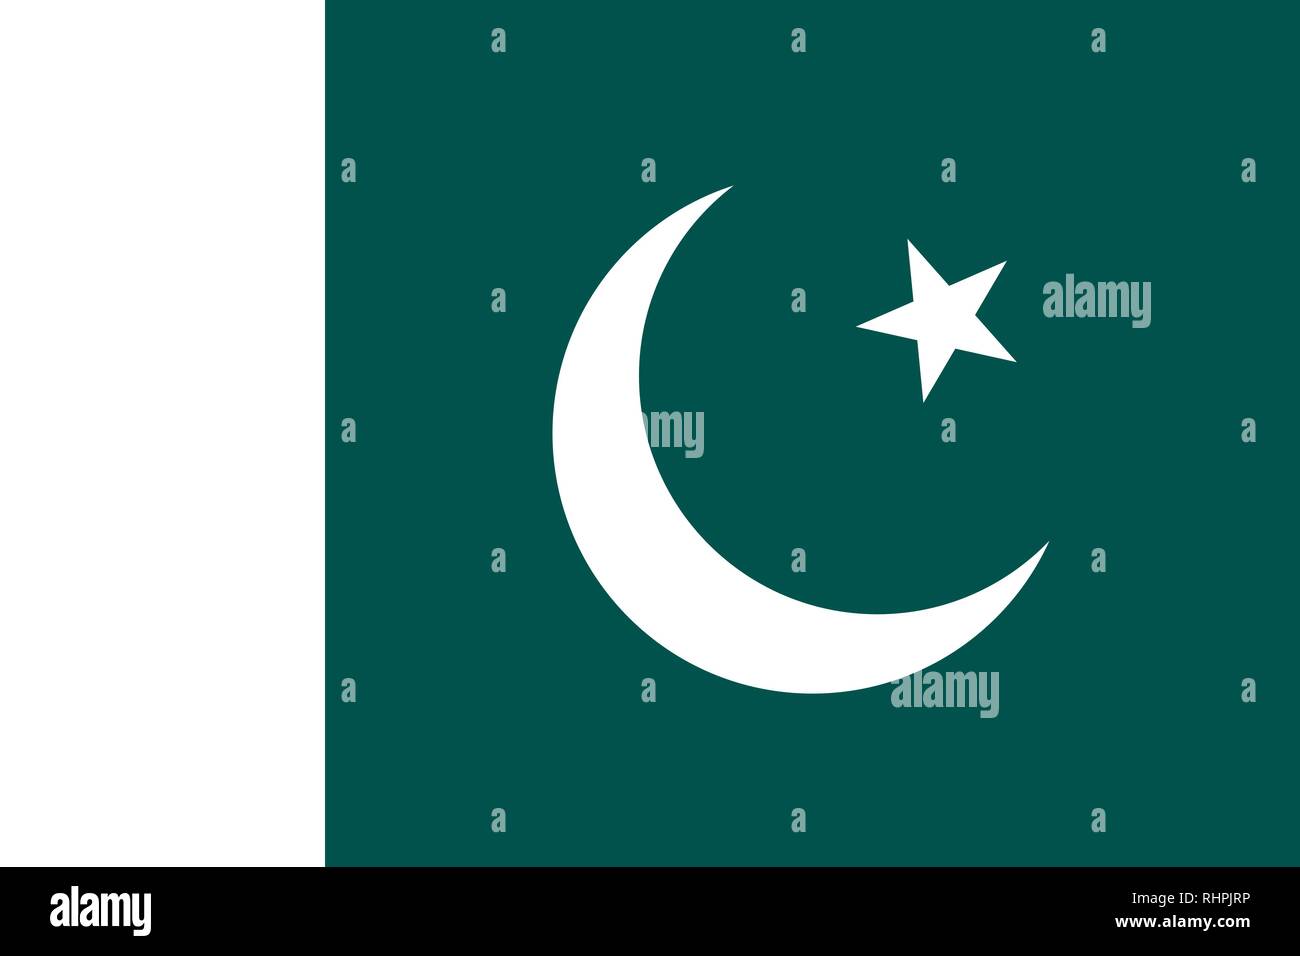 Vector Image of Pakistan Flag. Based on the official and exact Pakistani flag dimensions (3:2) & colors (330C and White) Stock Vector